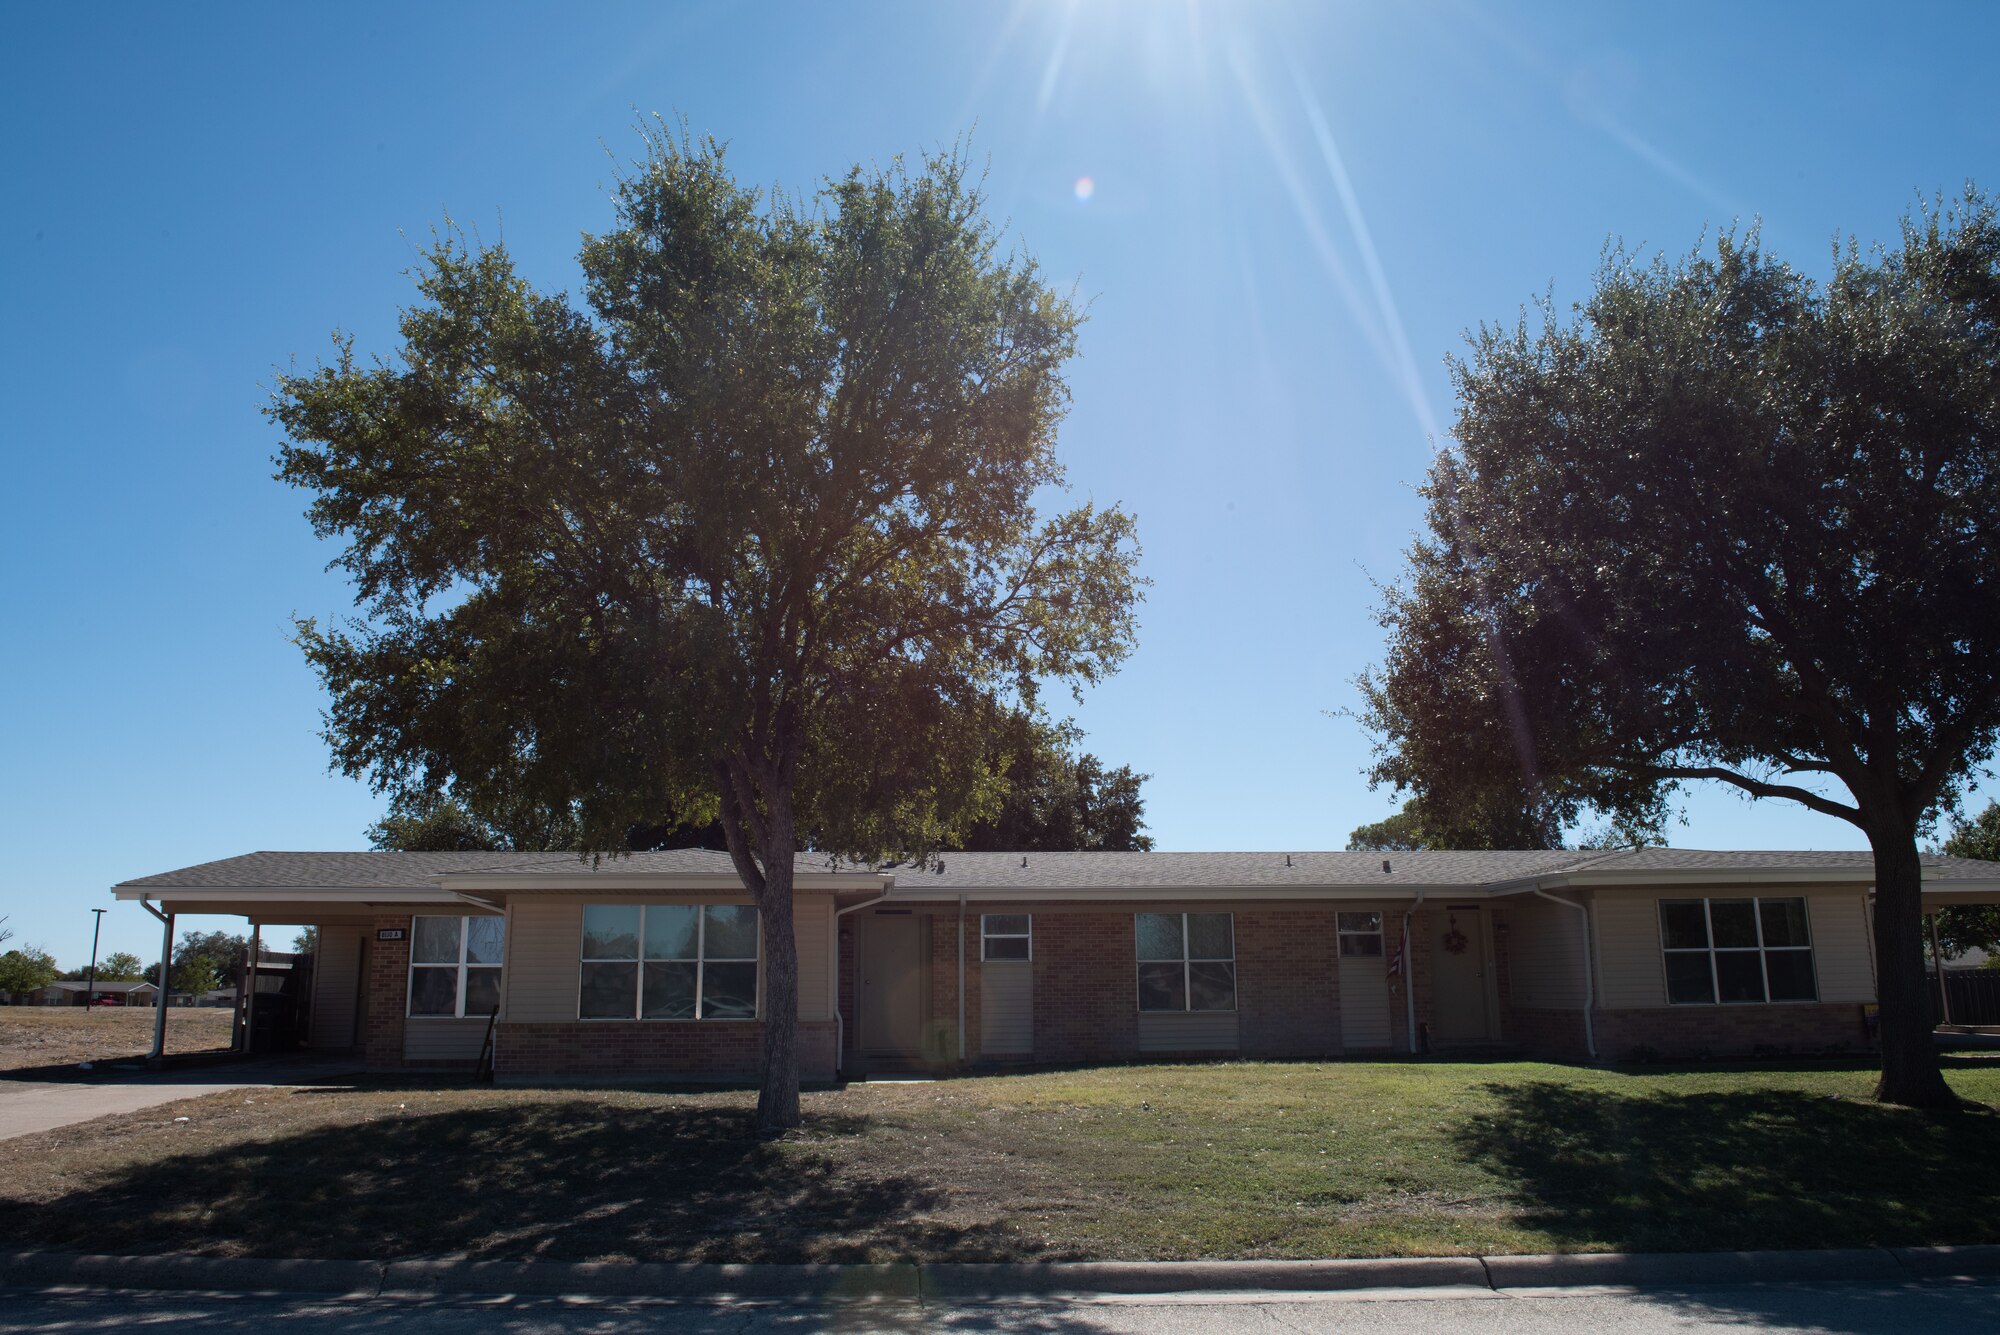 U.S. Air Force on base housing at Laughlin Air Force Base, Texas, Oct. 29, 2021. (U.S. Force photo by Airman Kailee Reynolds)